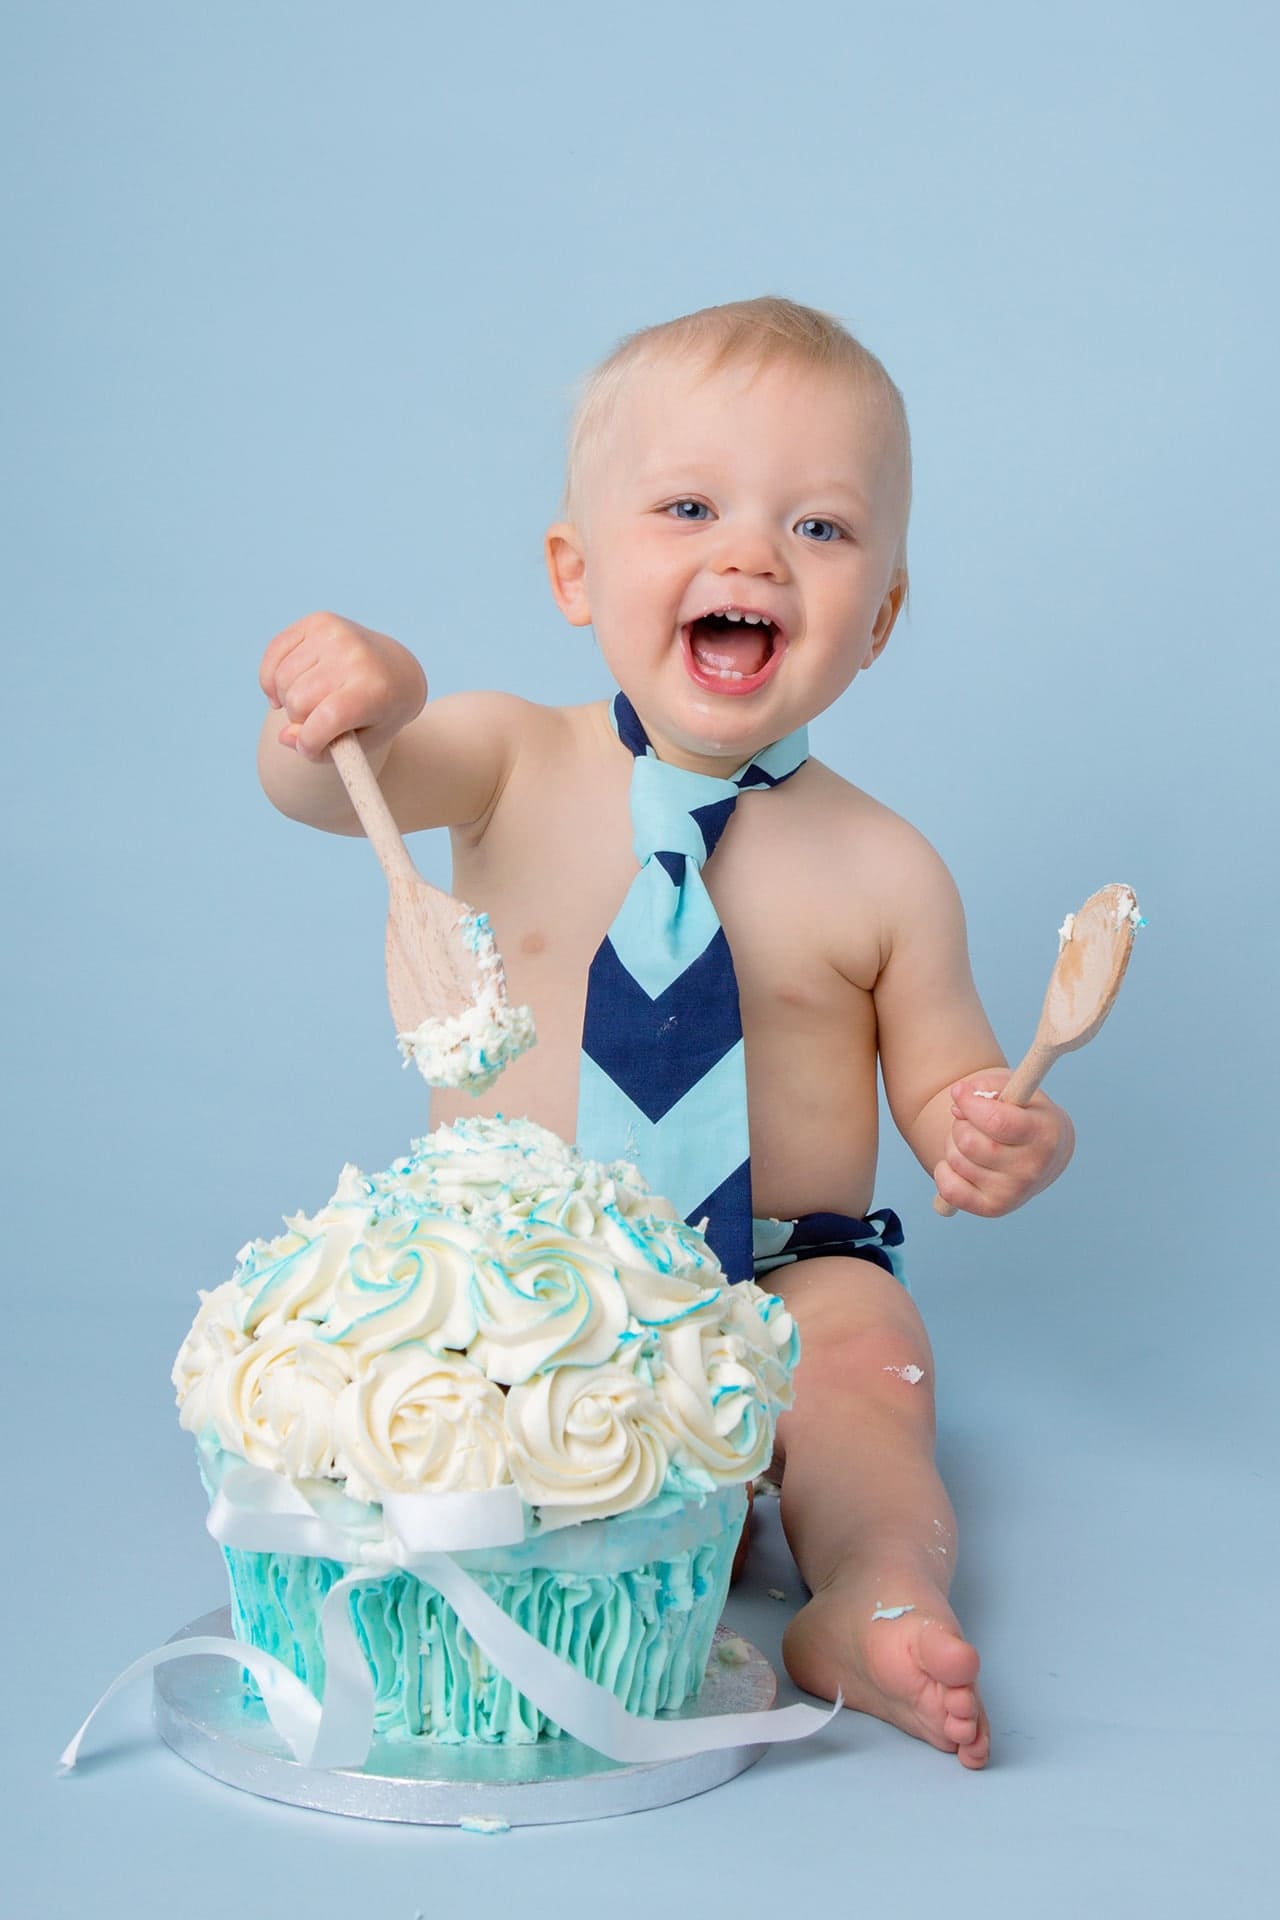 Baby cake smash with boy laughing in front of blue cake